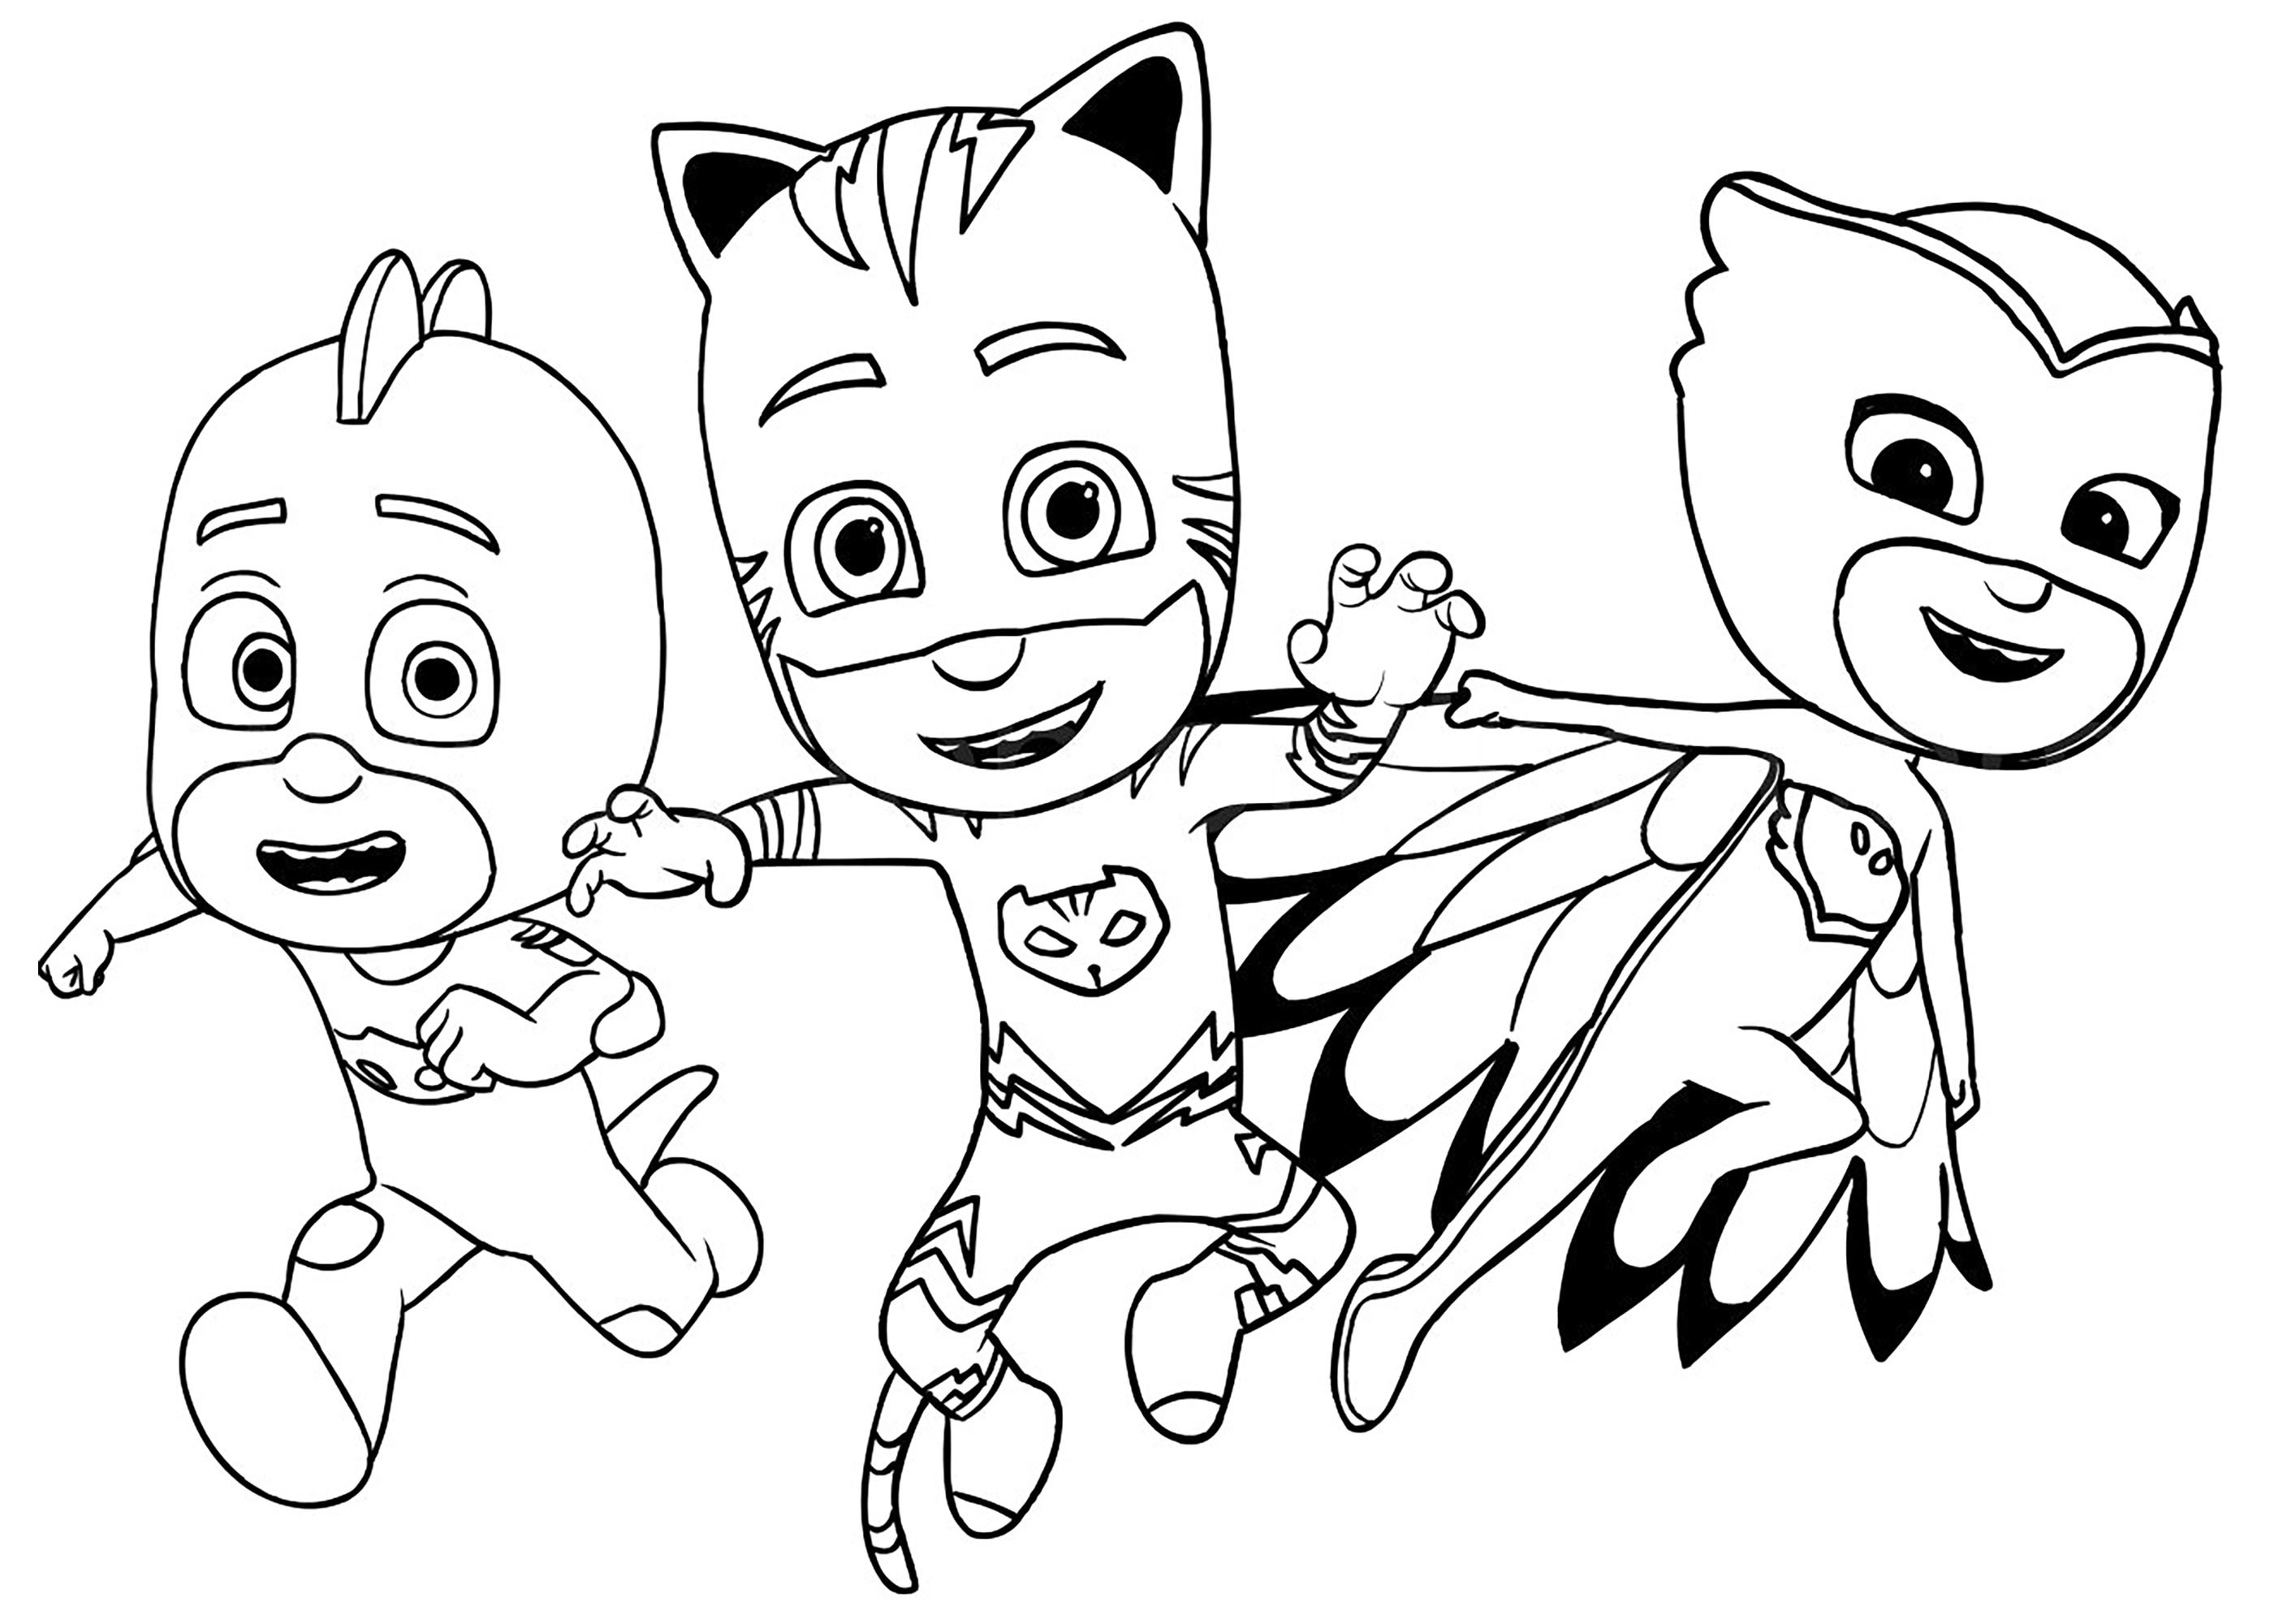 Free Coloring Sheets For Boys Pj Mask
 Pj masks to print for free PJ Masks Kids Coloring Pages